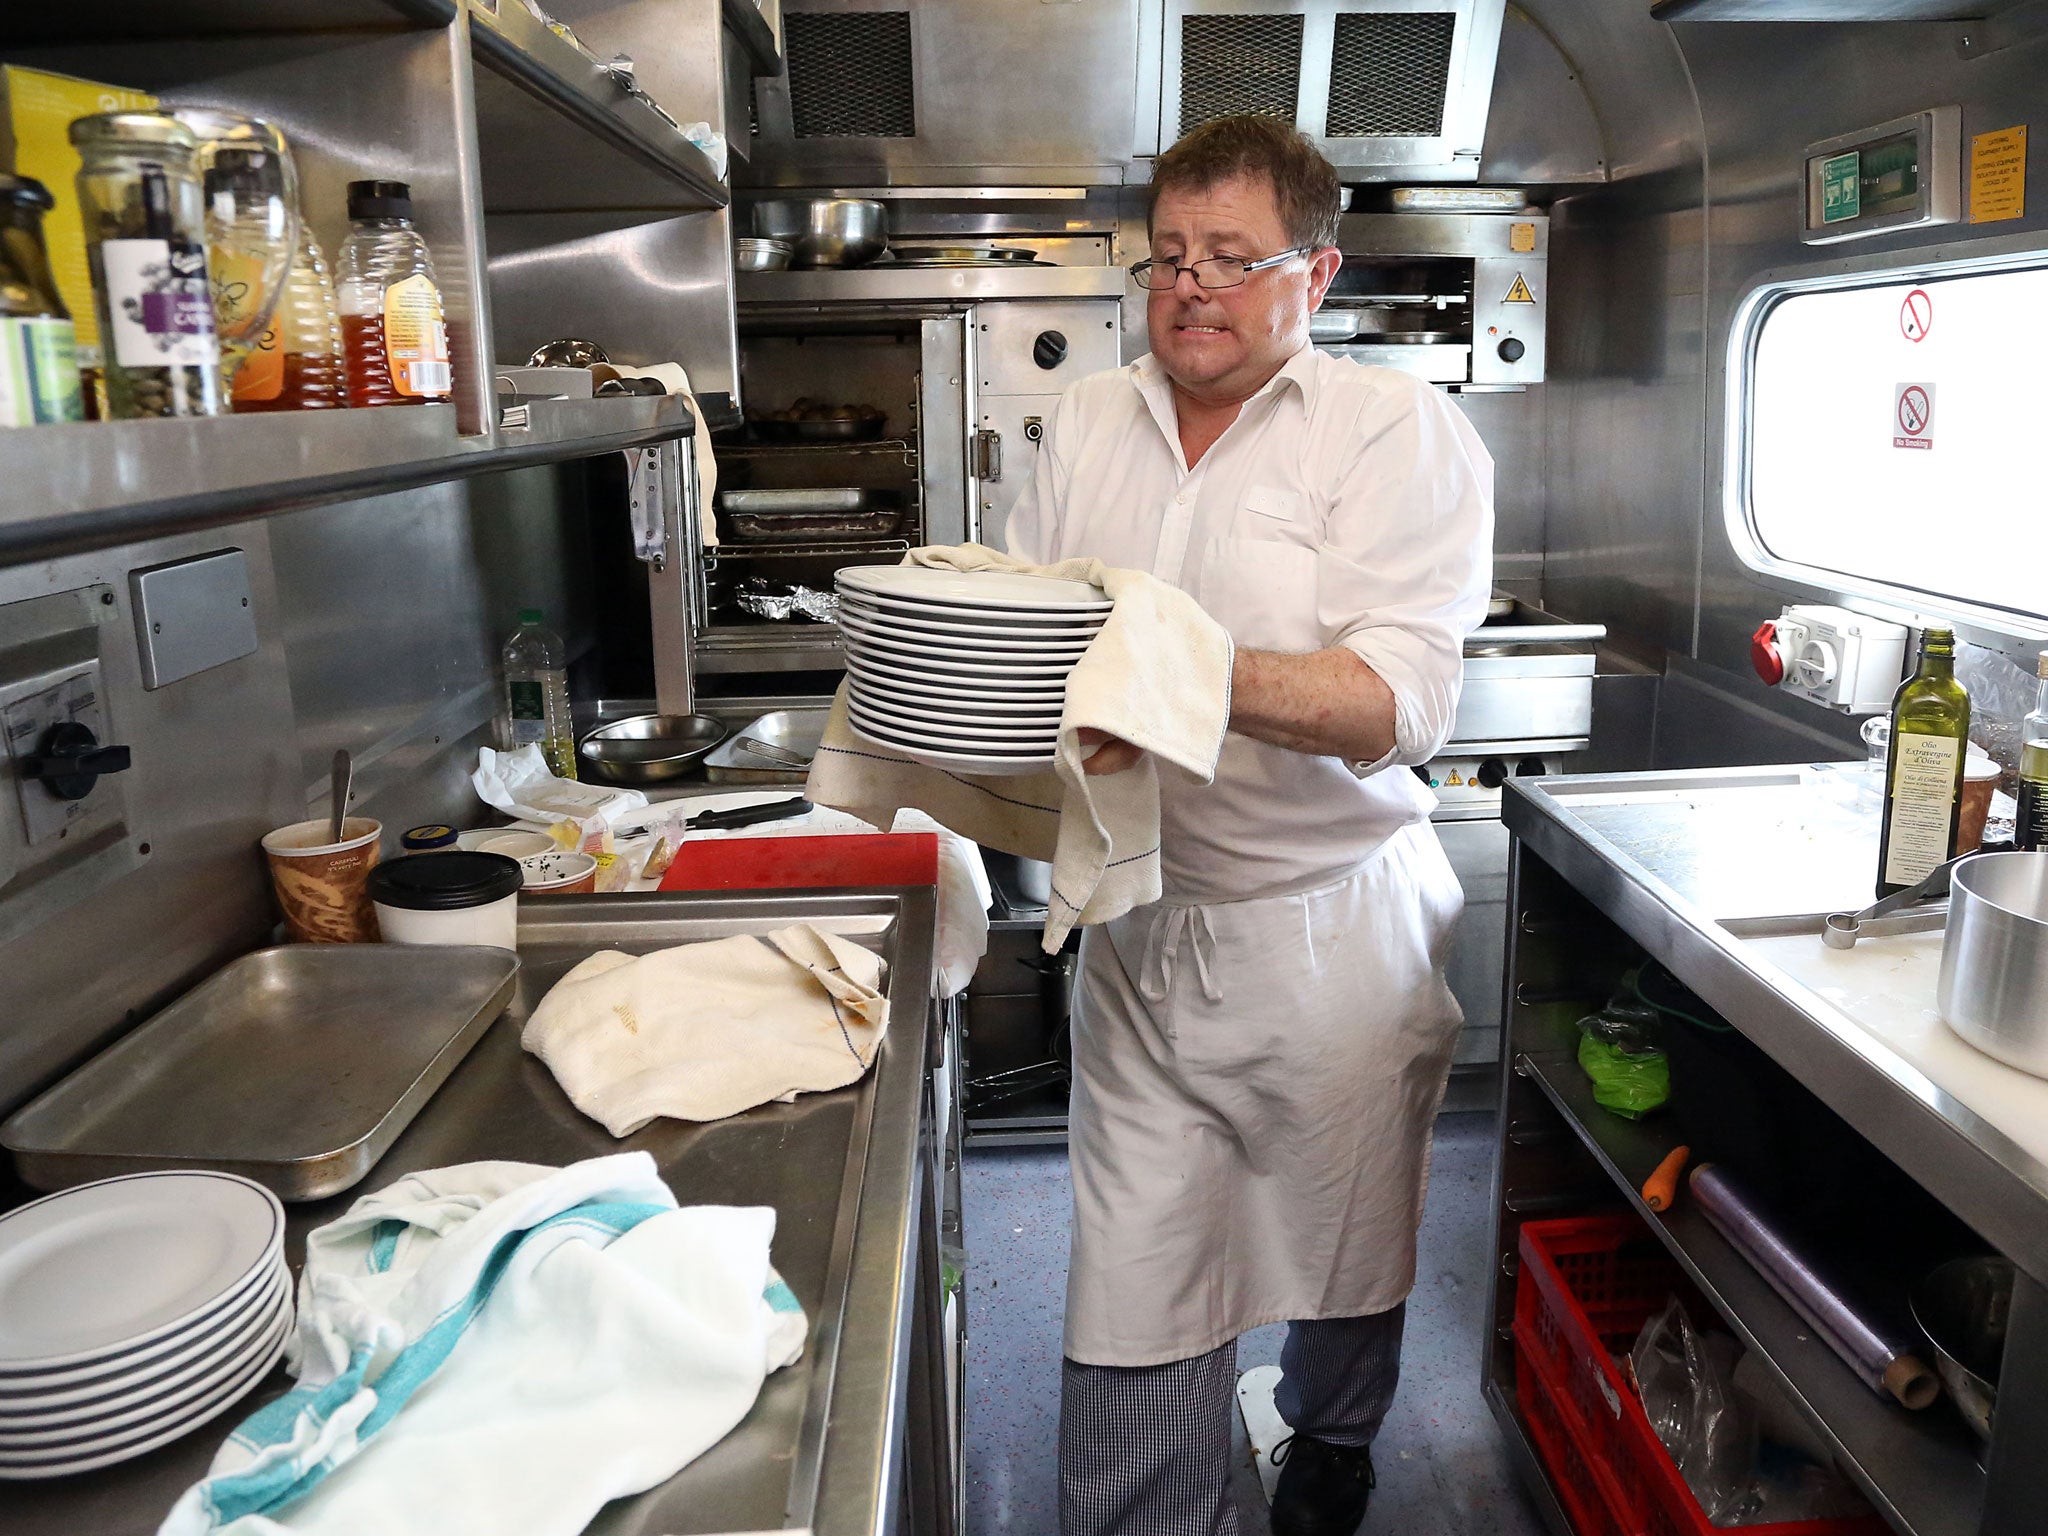 Chef Pete Downham prepares lunch for passengers in the Pullman dining car from London to Penzance